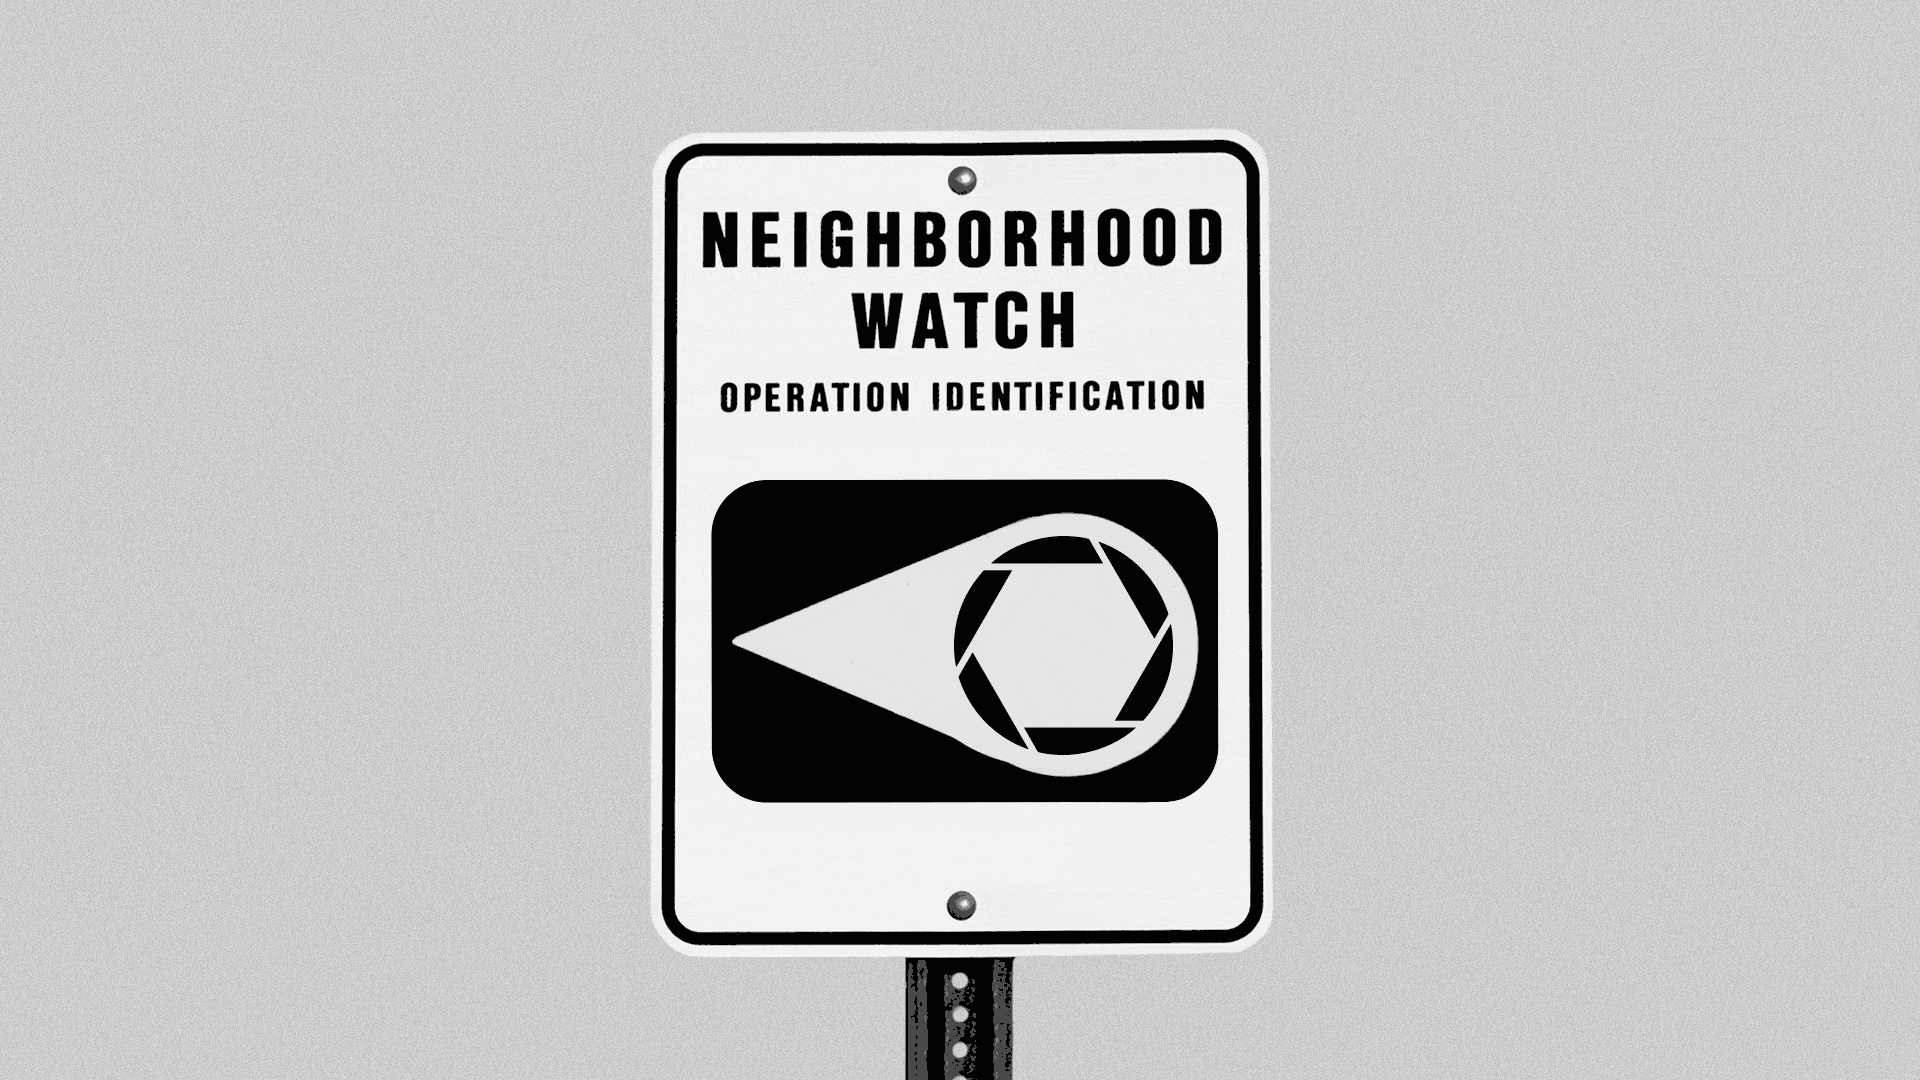 Animated illustration of a neighborhood crime watch sign with a camera aperture opening and closing as the eye.